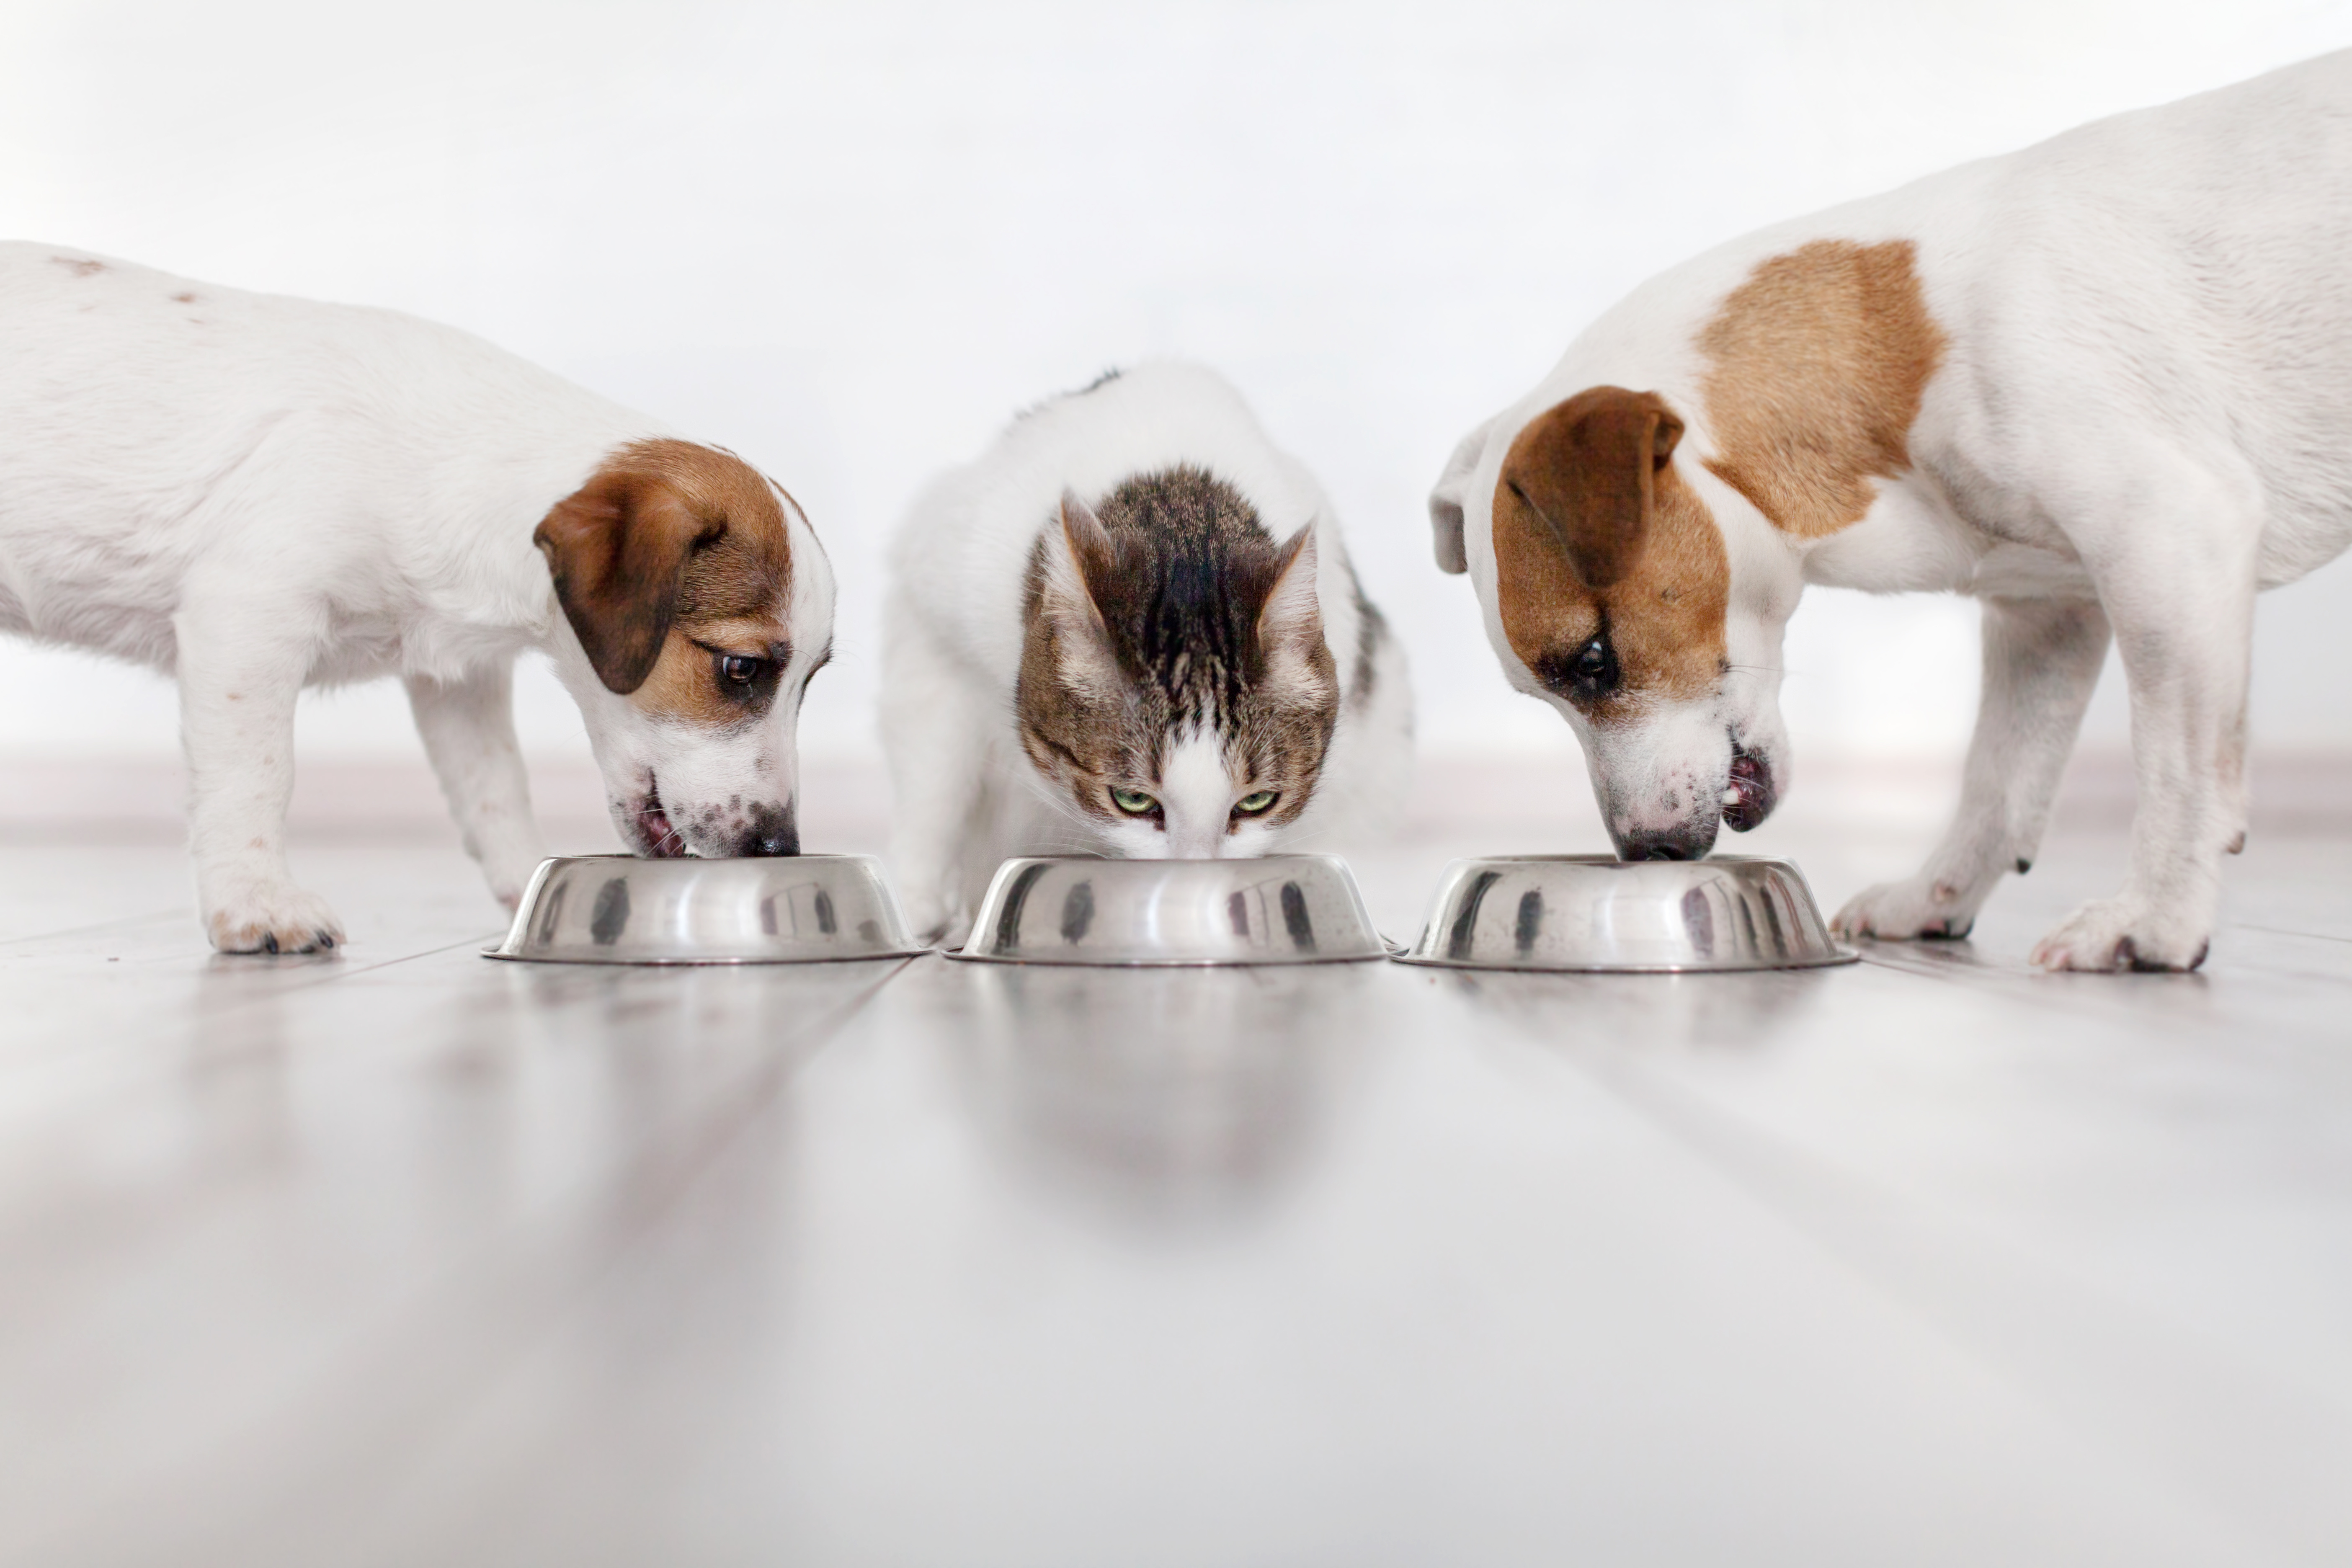 A dog, a cat and a puppy eat their food.